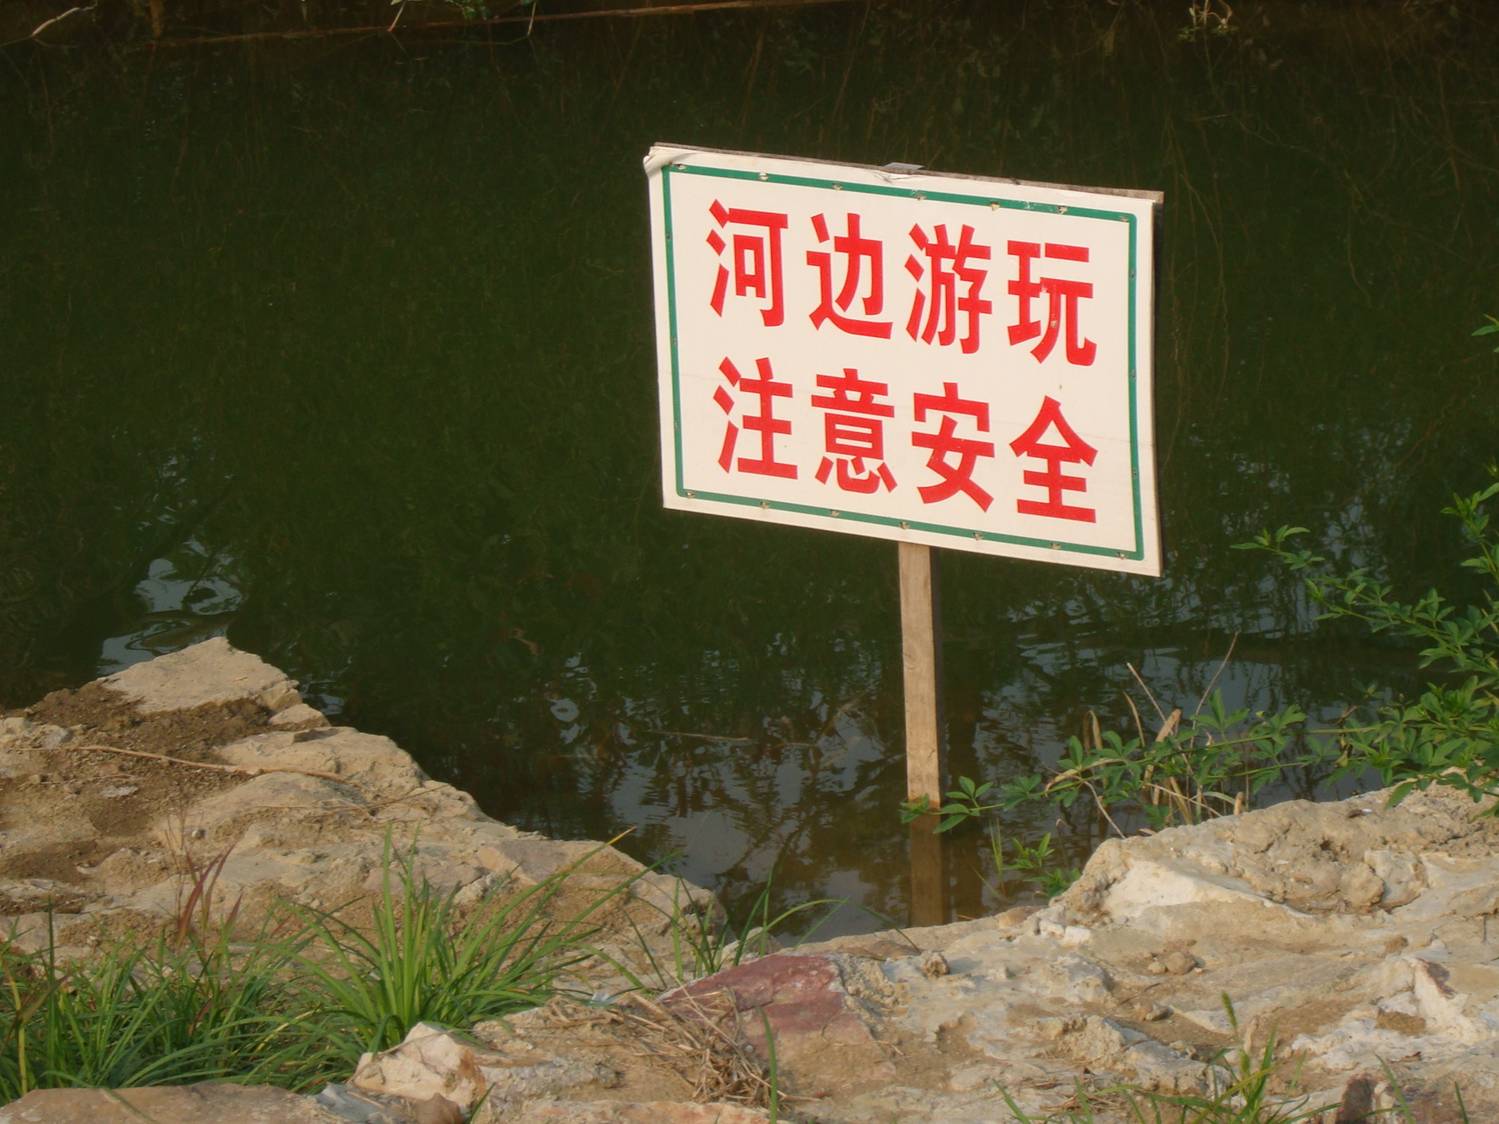 picture: Sign warning of deep water, advising careful play.  Canal side park near Jiangnan University, Wuxi, China